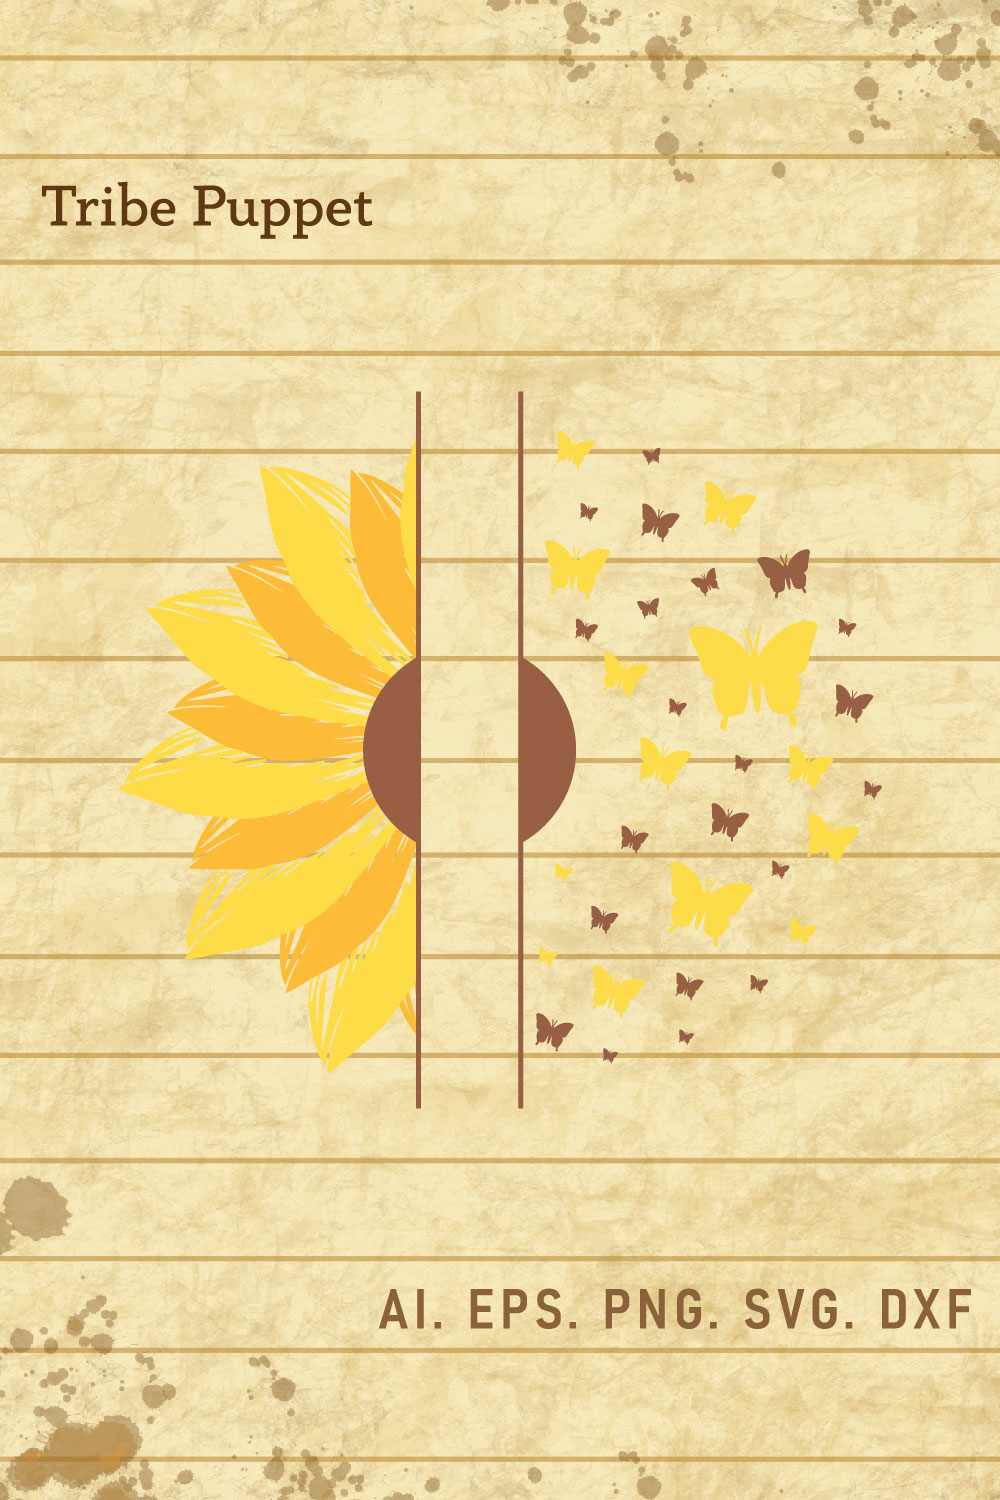 Sunflower 38 pinterest preview image.